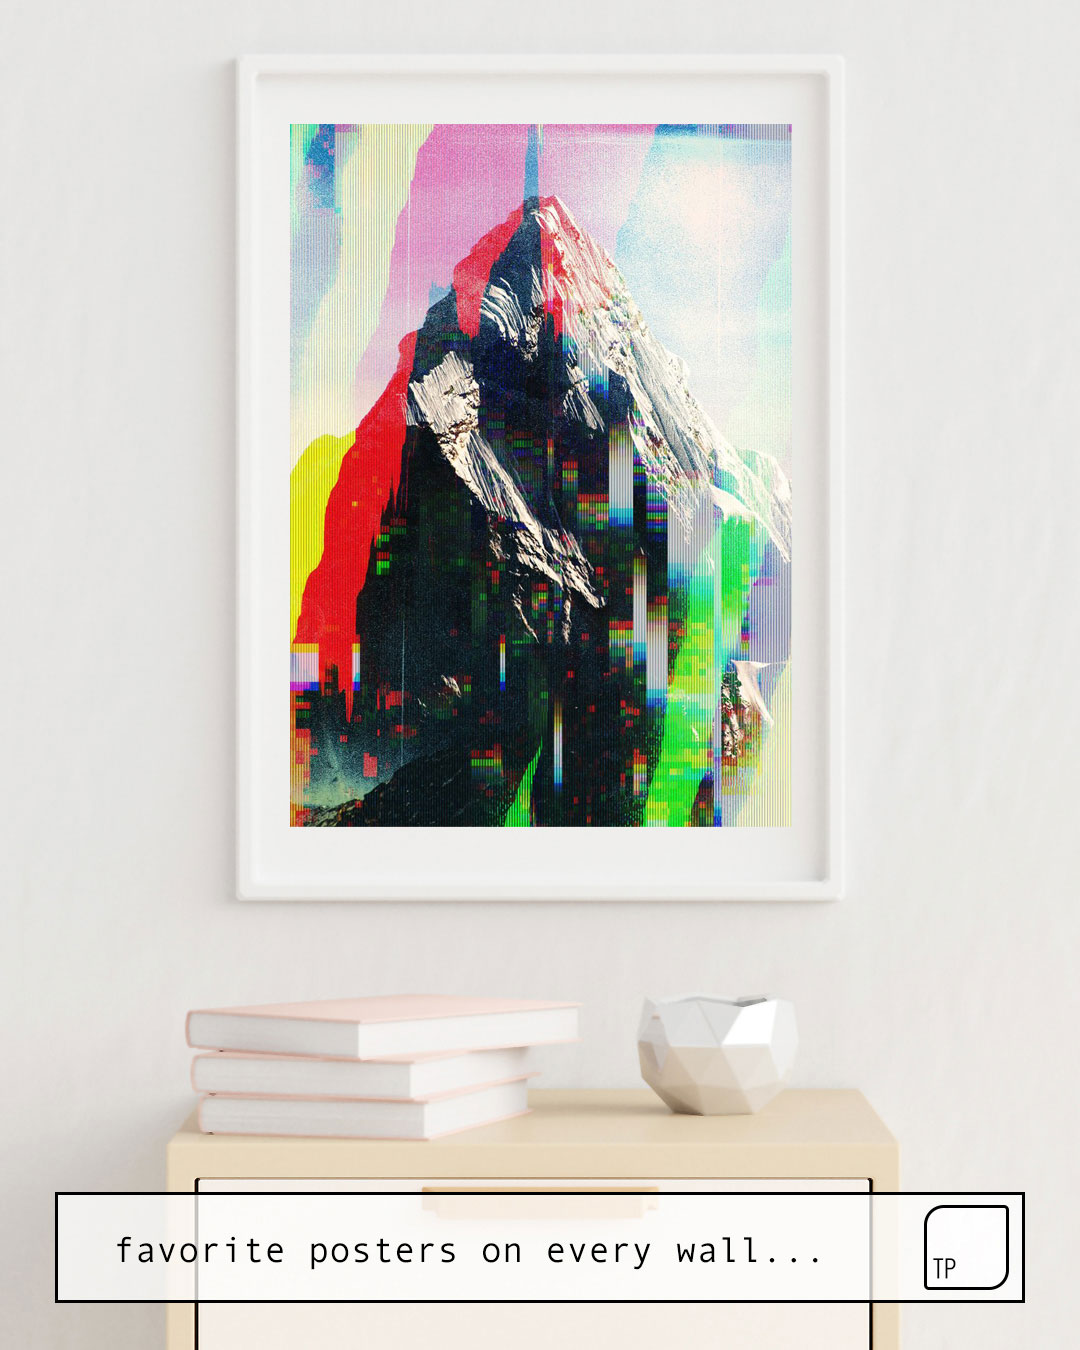 The photo shows an example of furnishing with the motif MOUNTAIN GLITCH I by Andreas Lie as mural